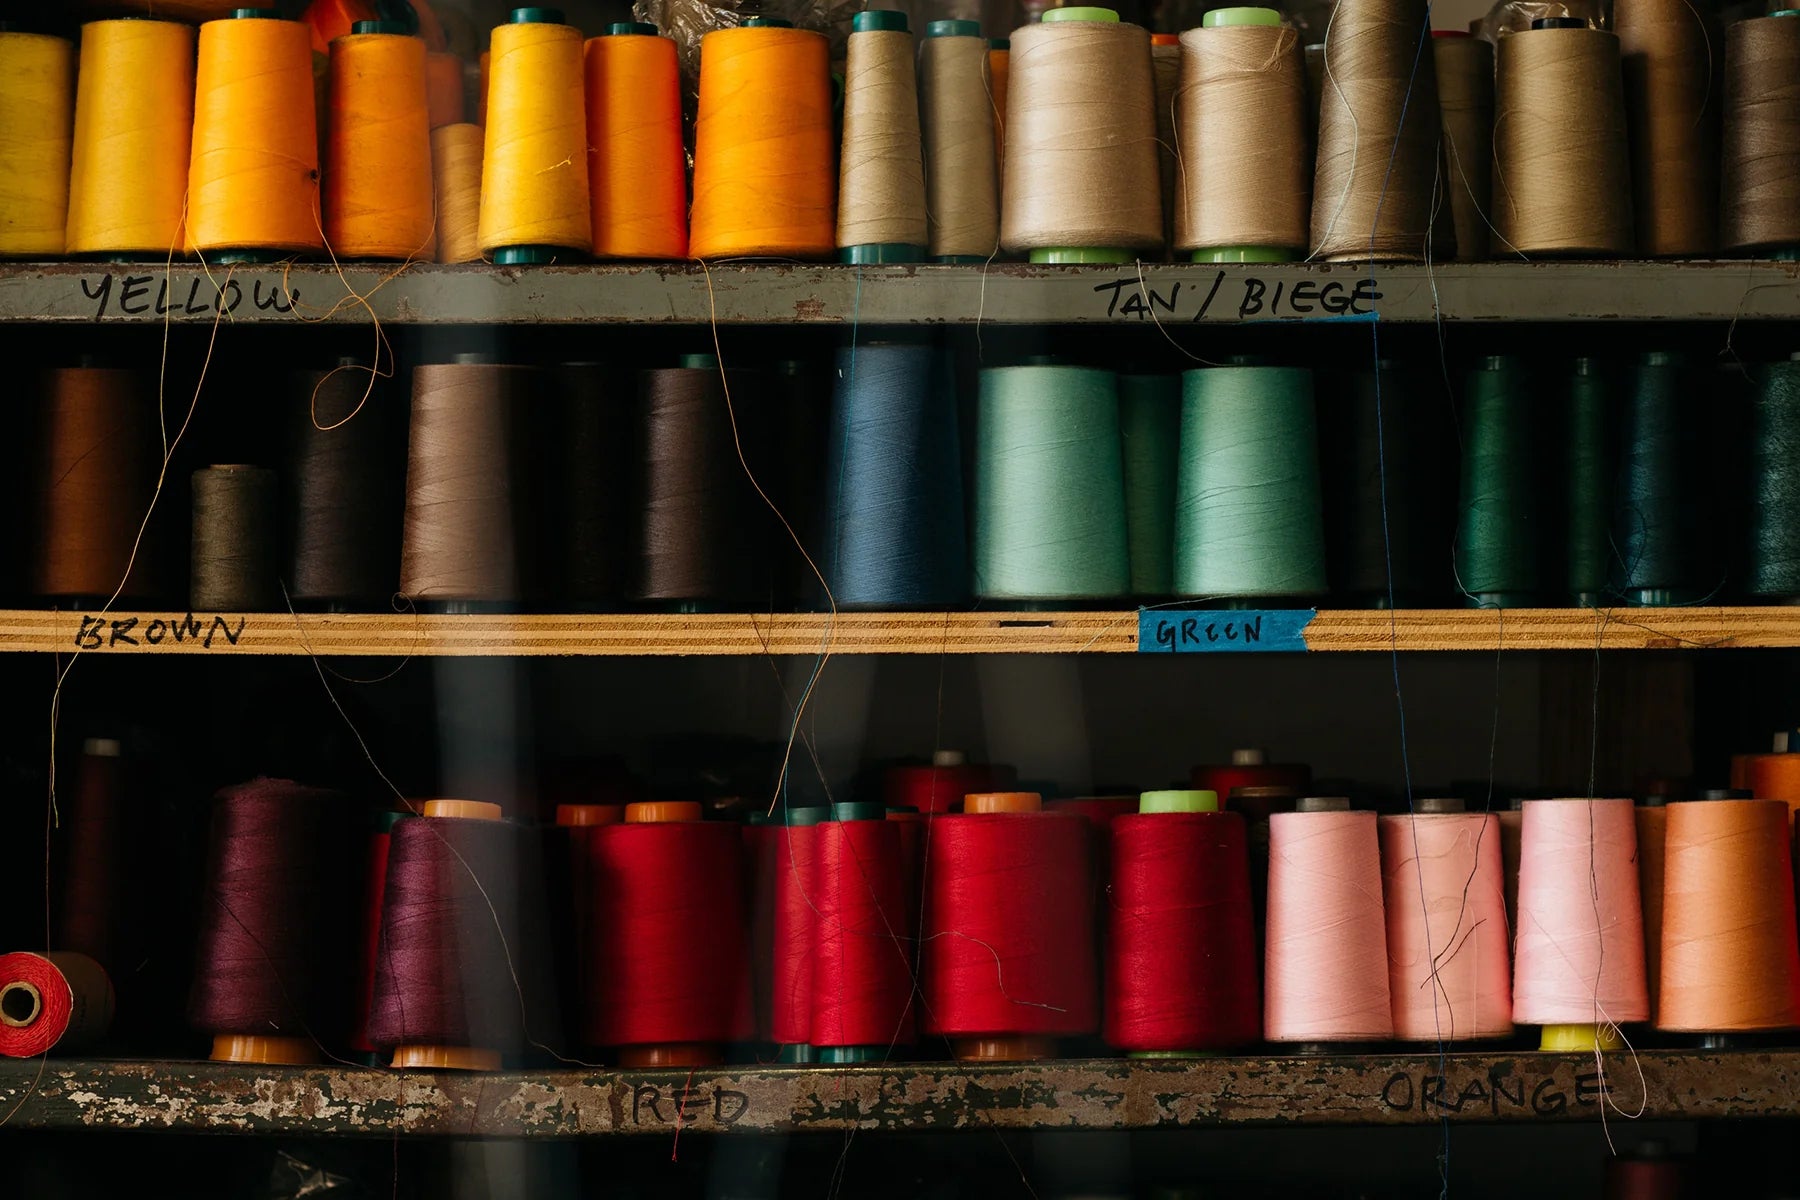 Shelves of spools of thread in many colors